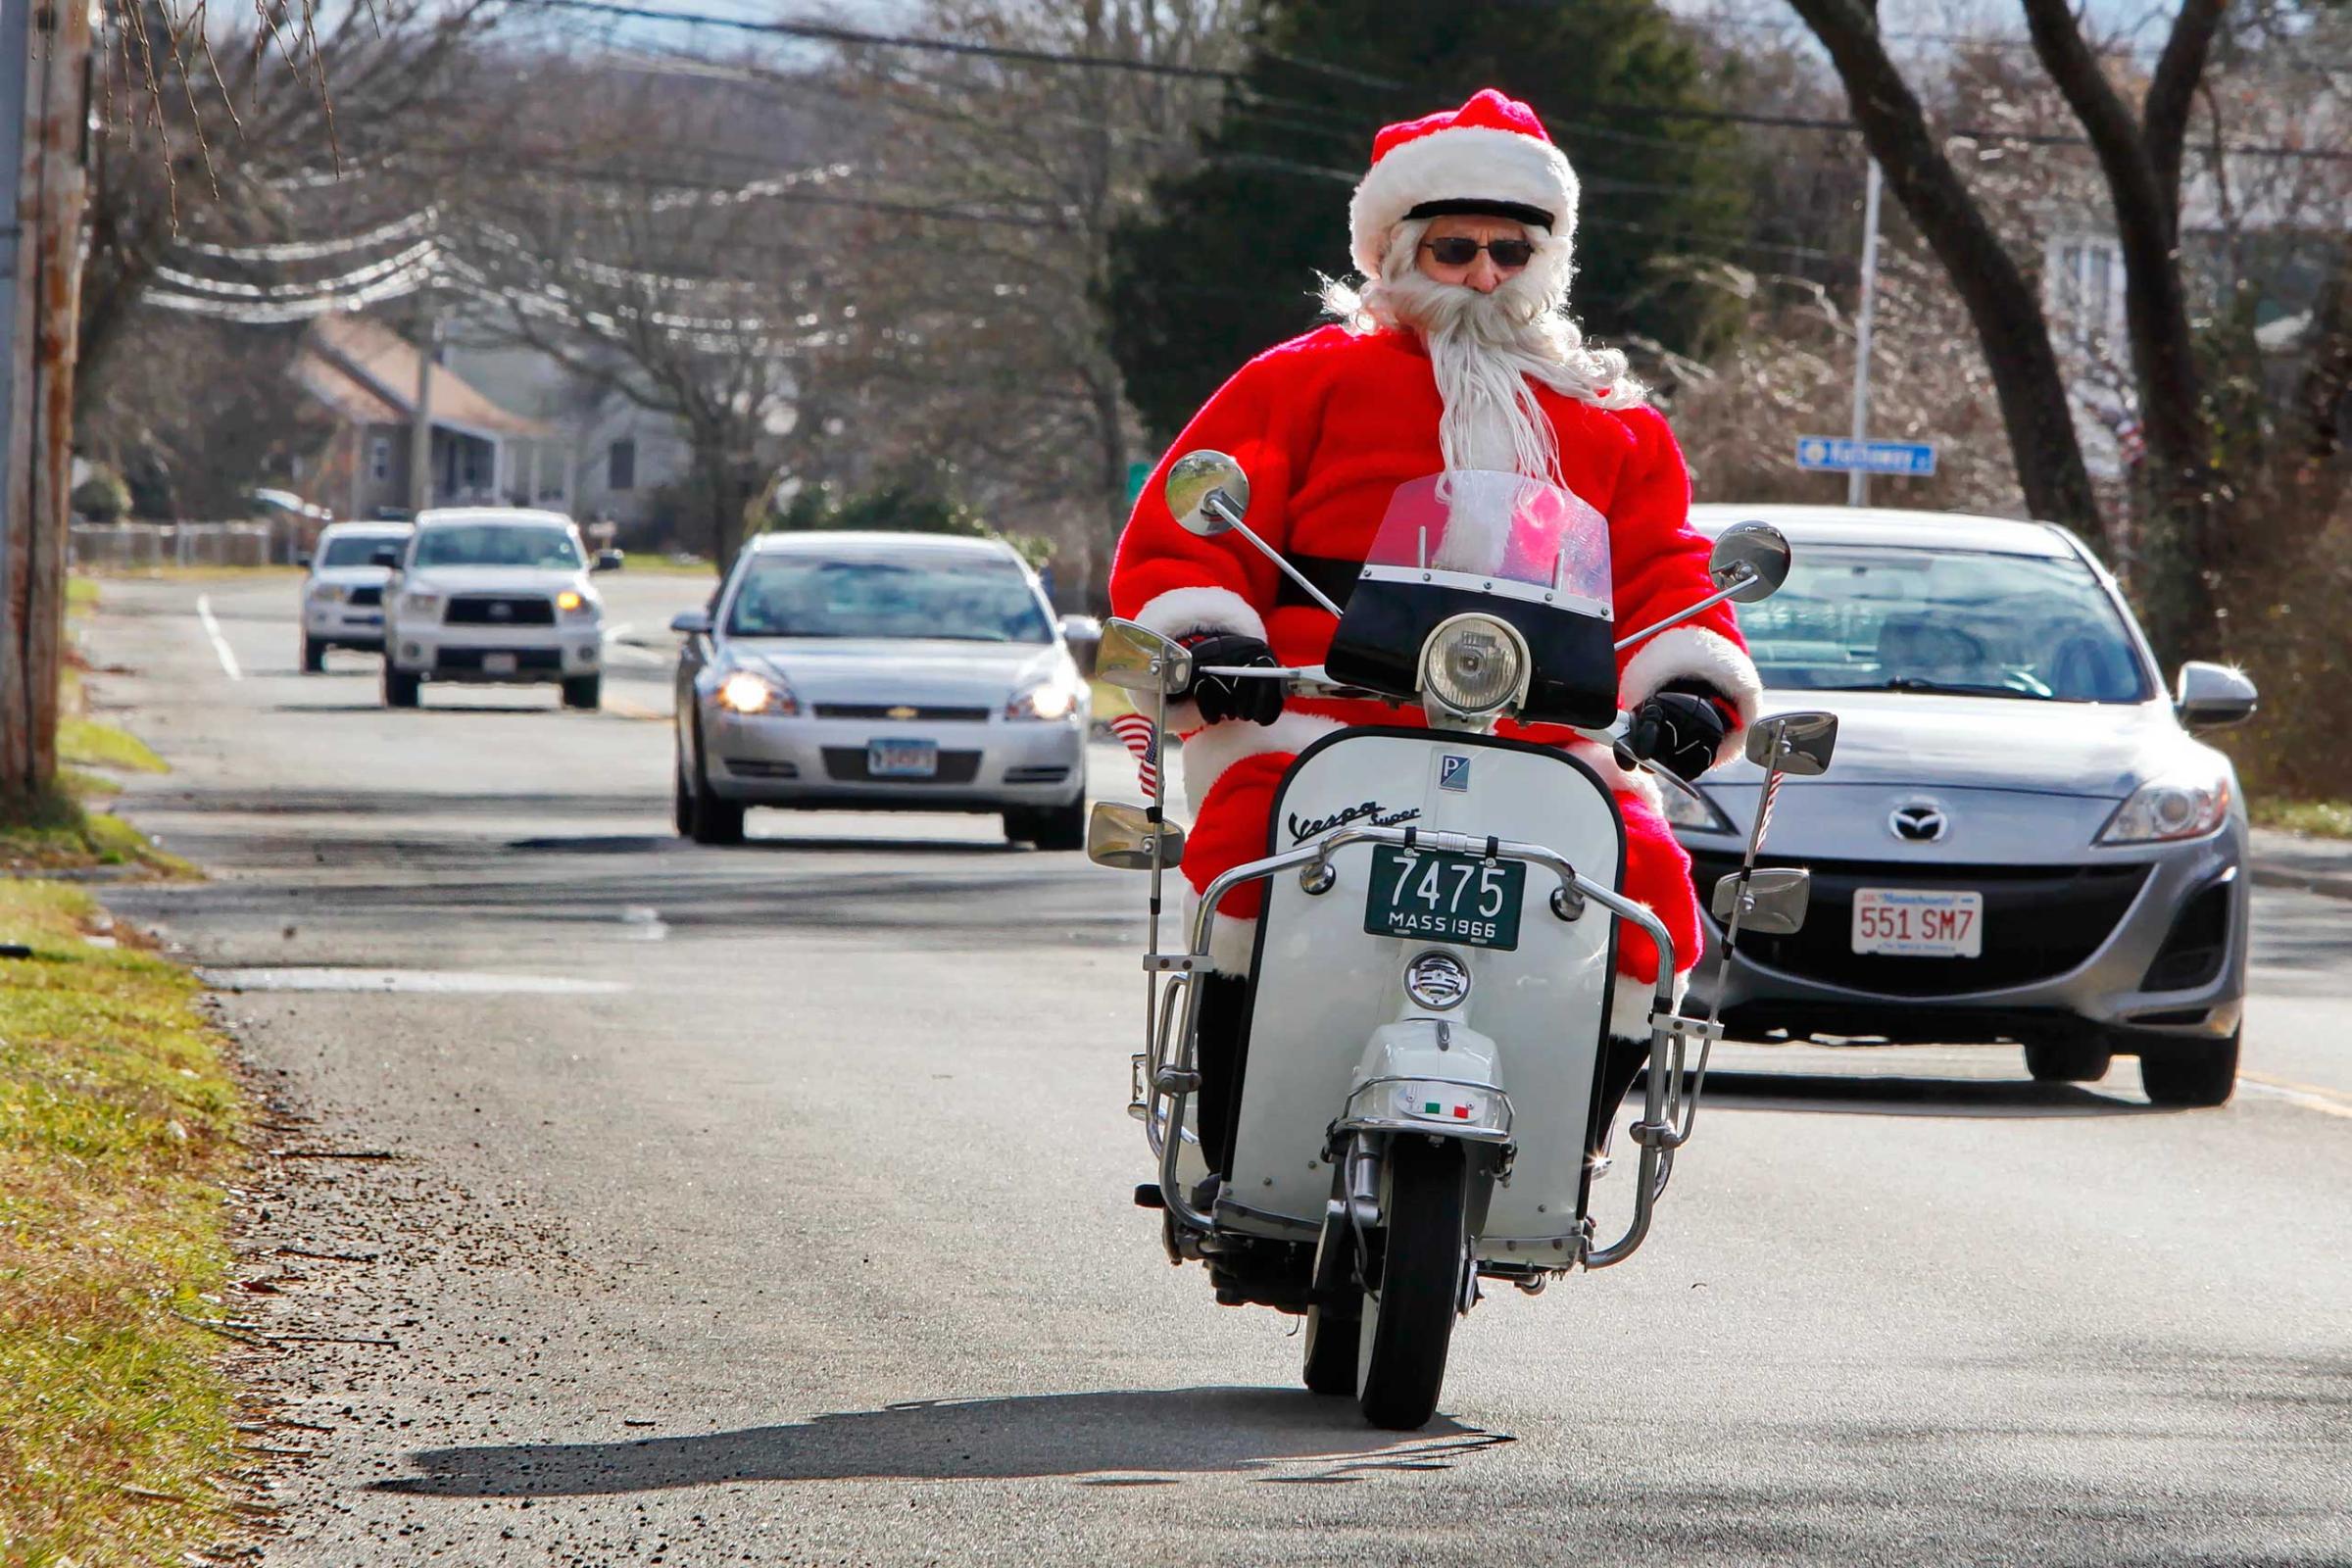 Gene Desrosiers dressed as Santa Claus rides his scooter down on Dec. 19, 2014 in Fairhaven, Mass.